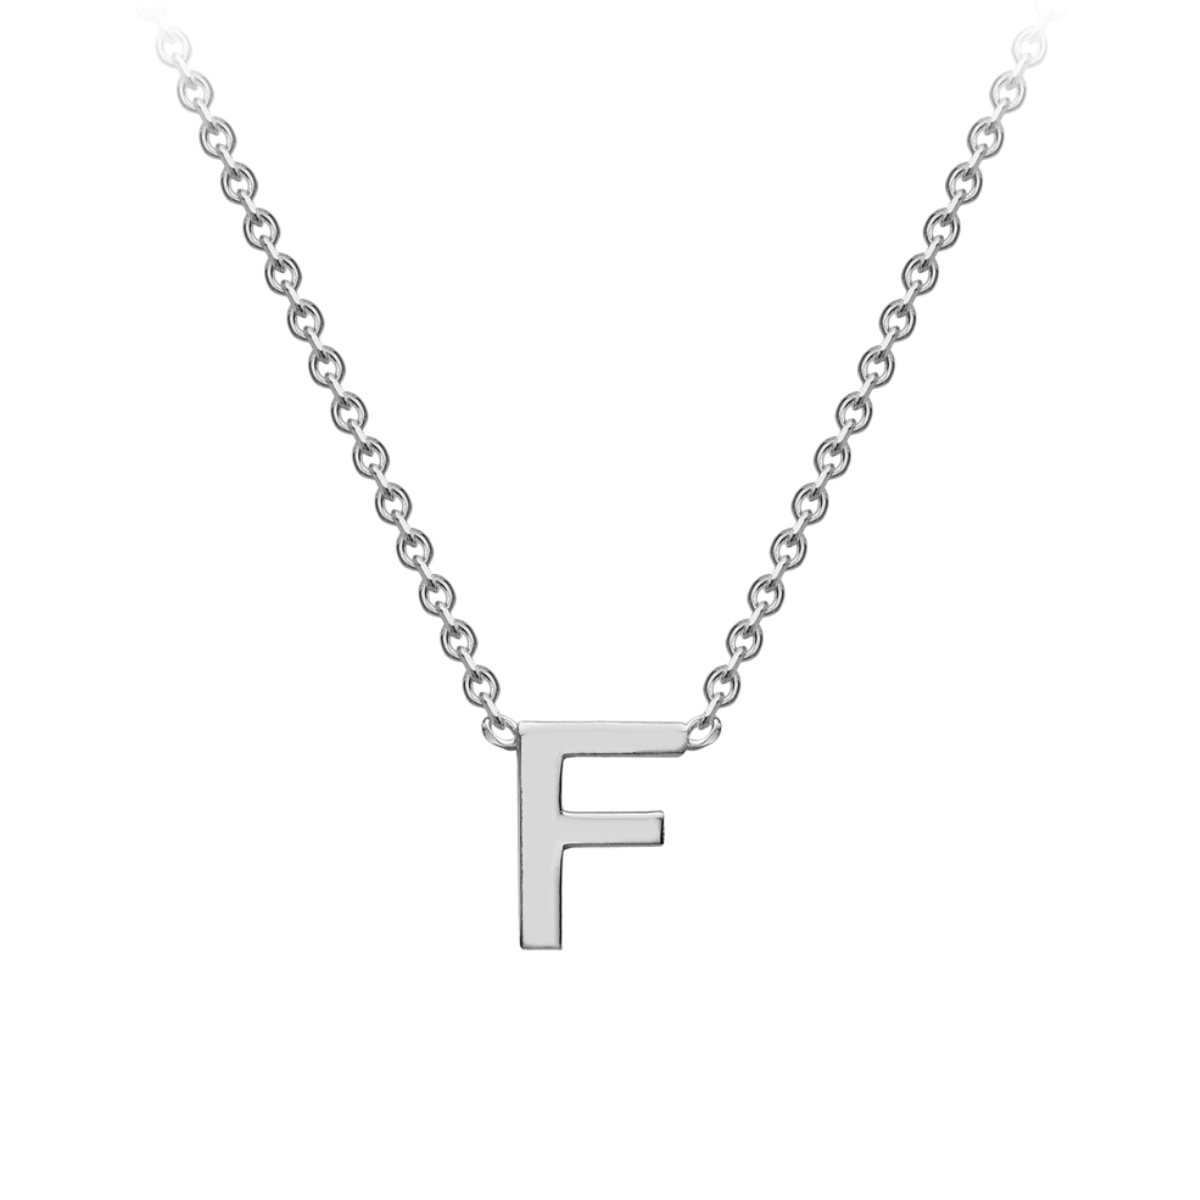 PETITE 'F' INITIAL NECKLACE | 9K SOLID WHITE GOLD